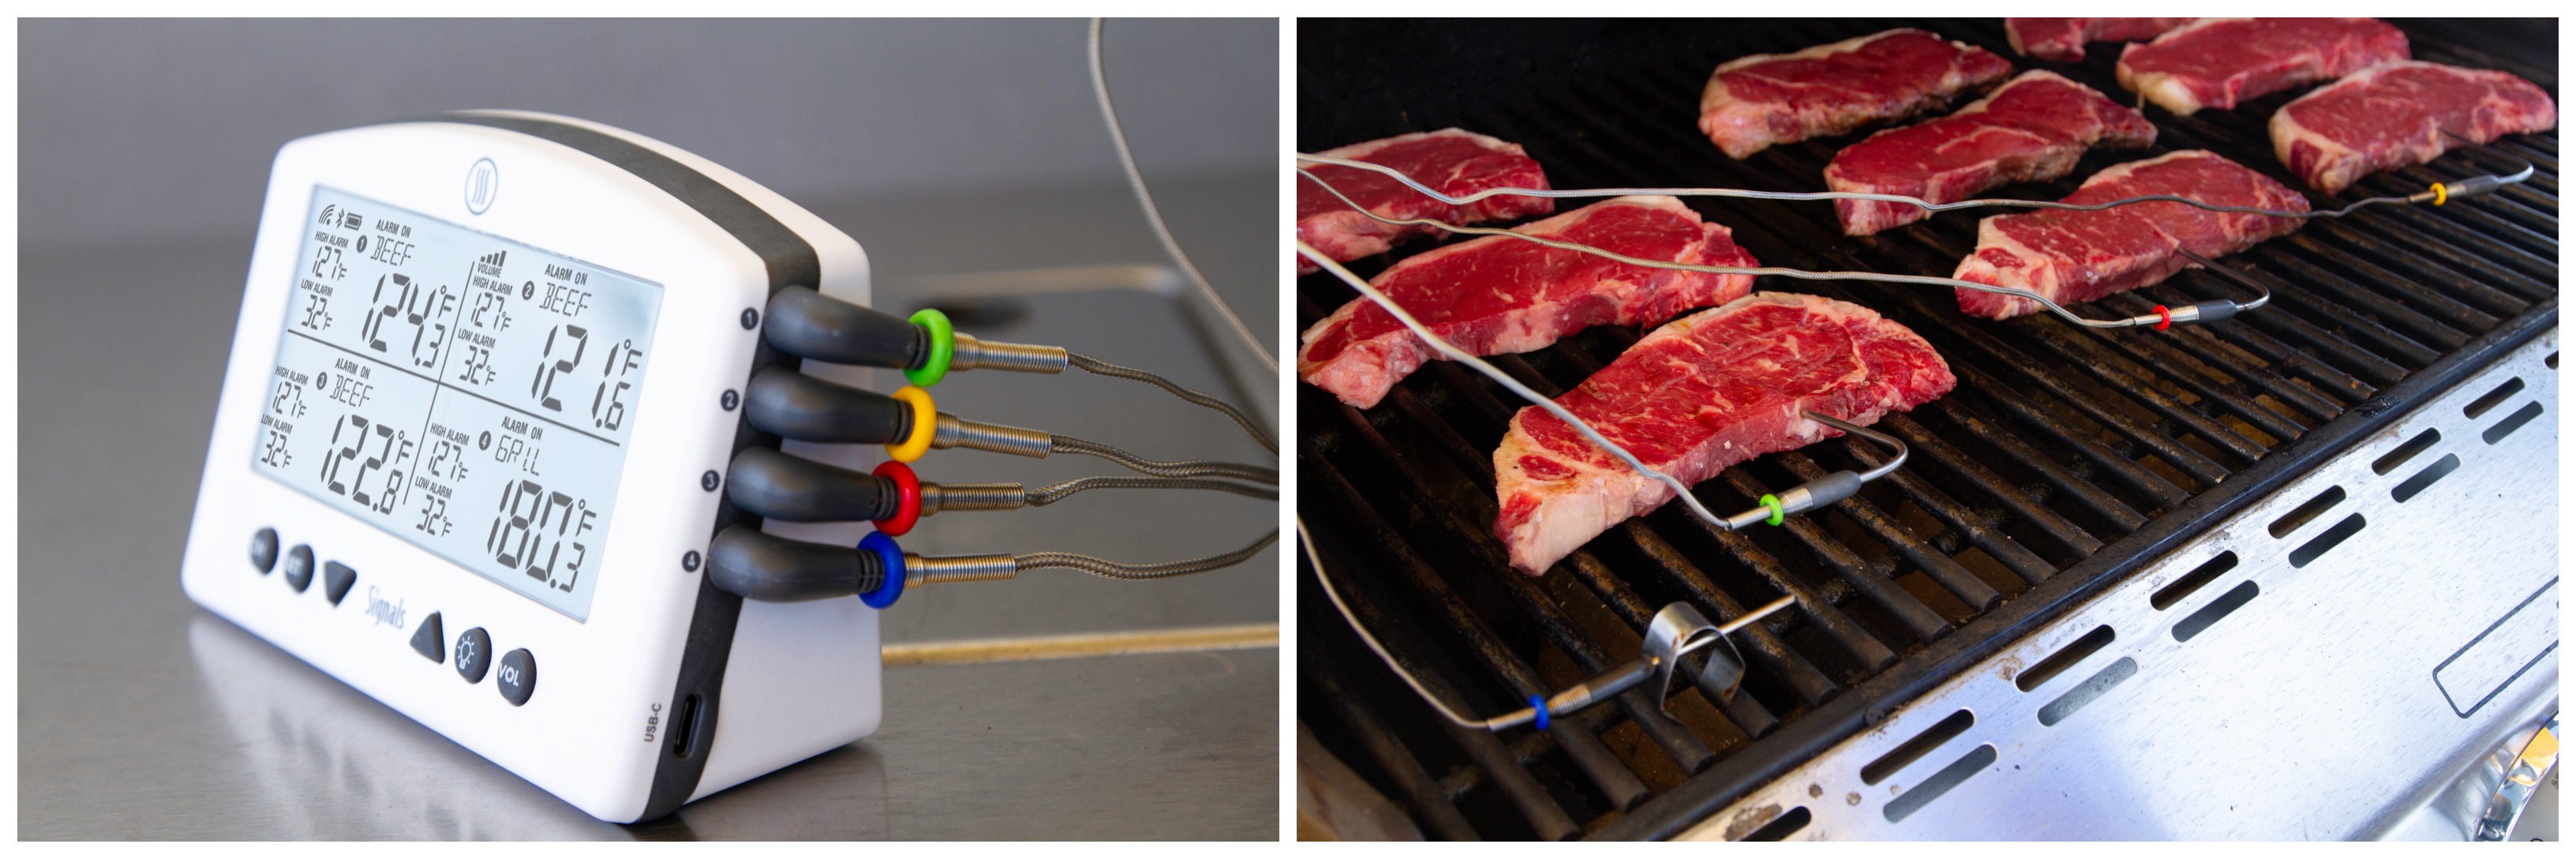 Grilling with Thermometers and Probe Safety